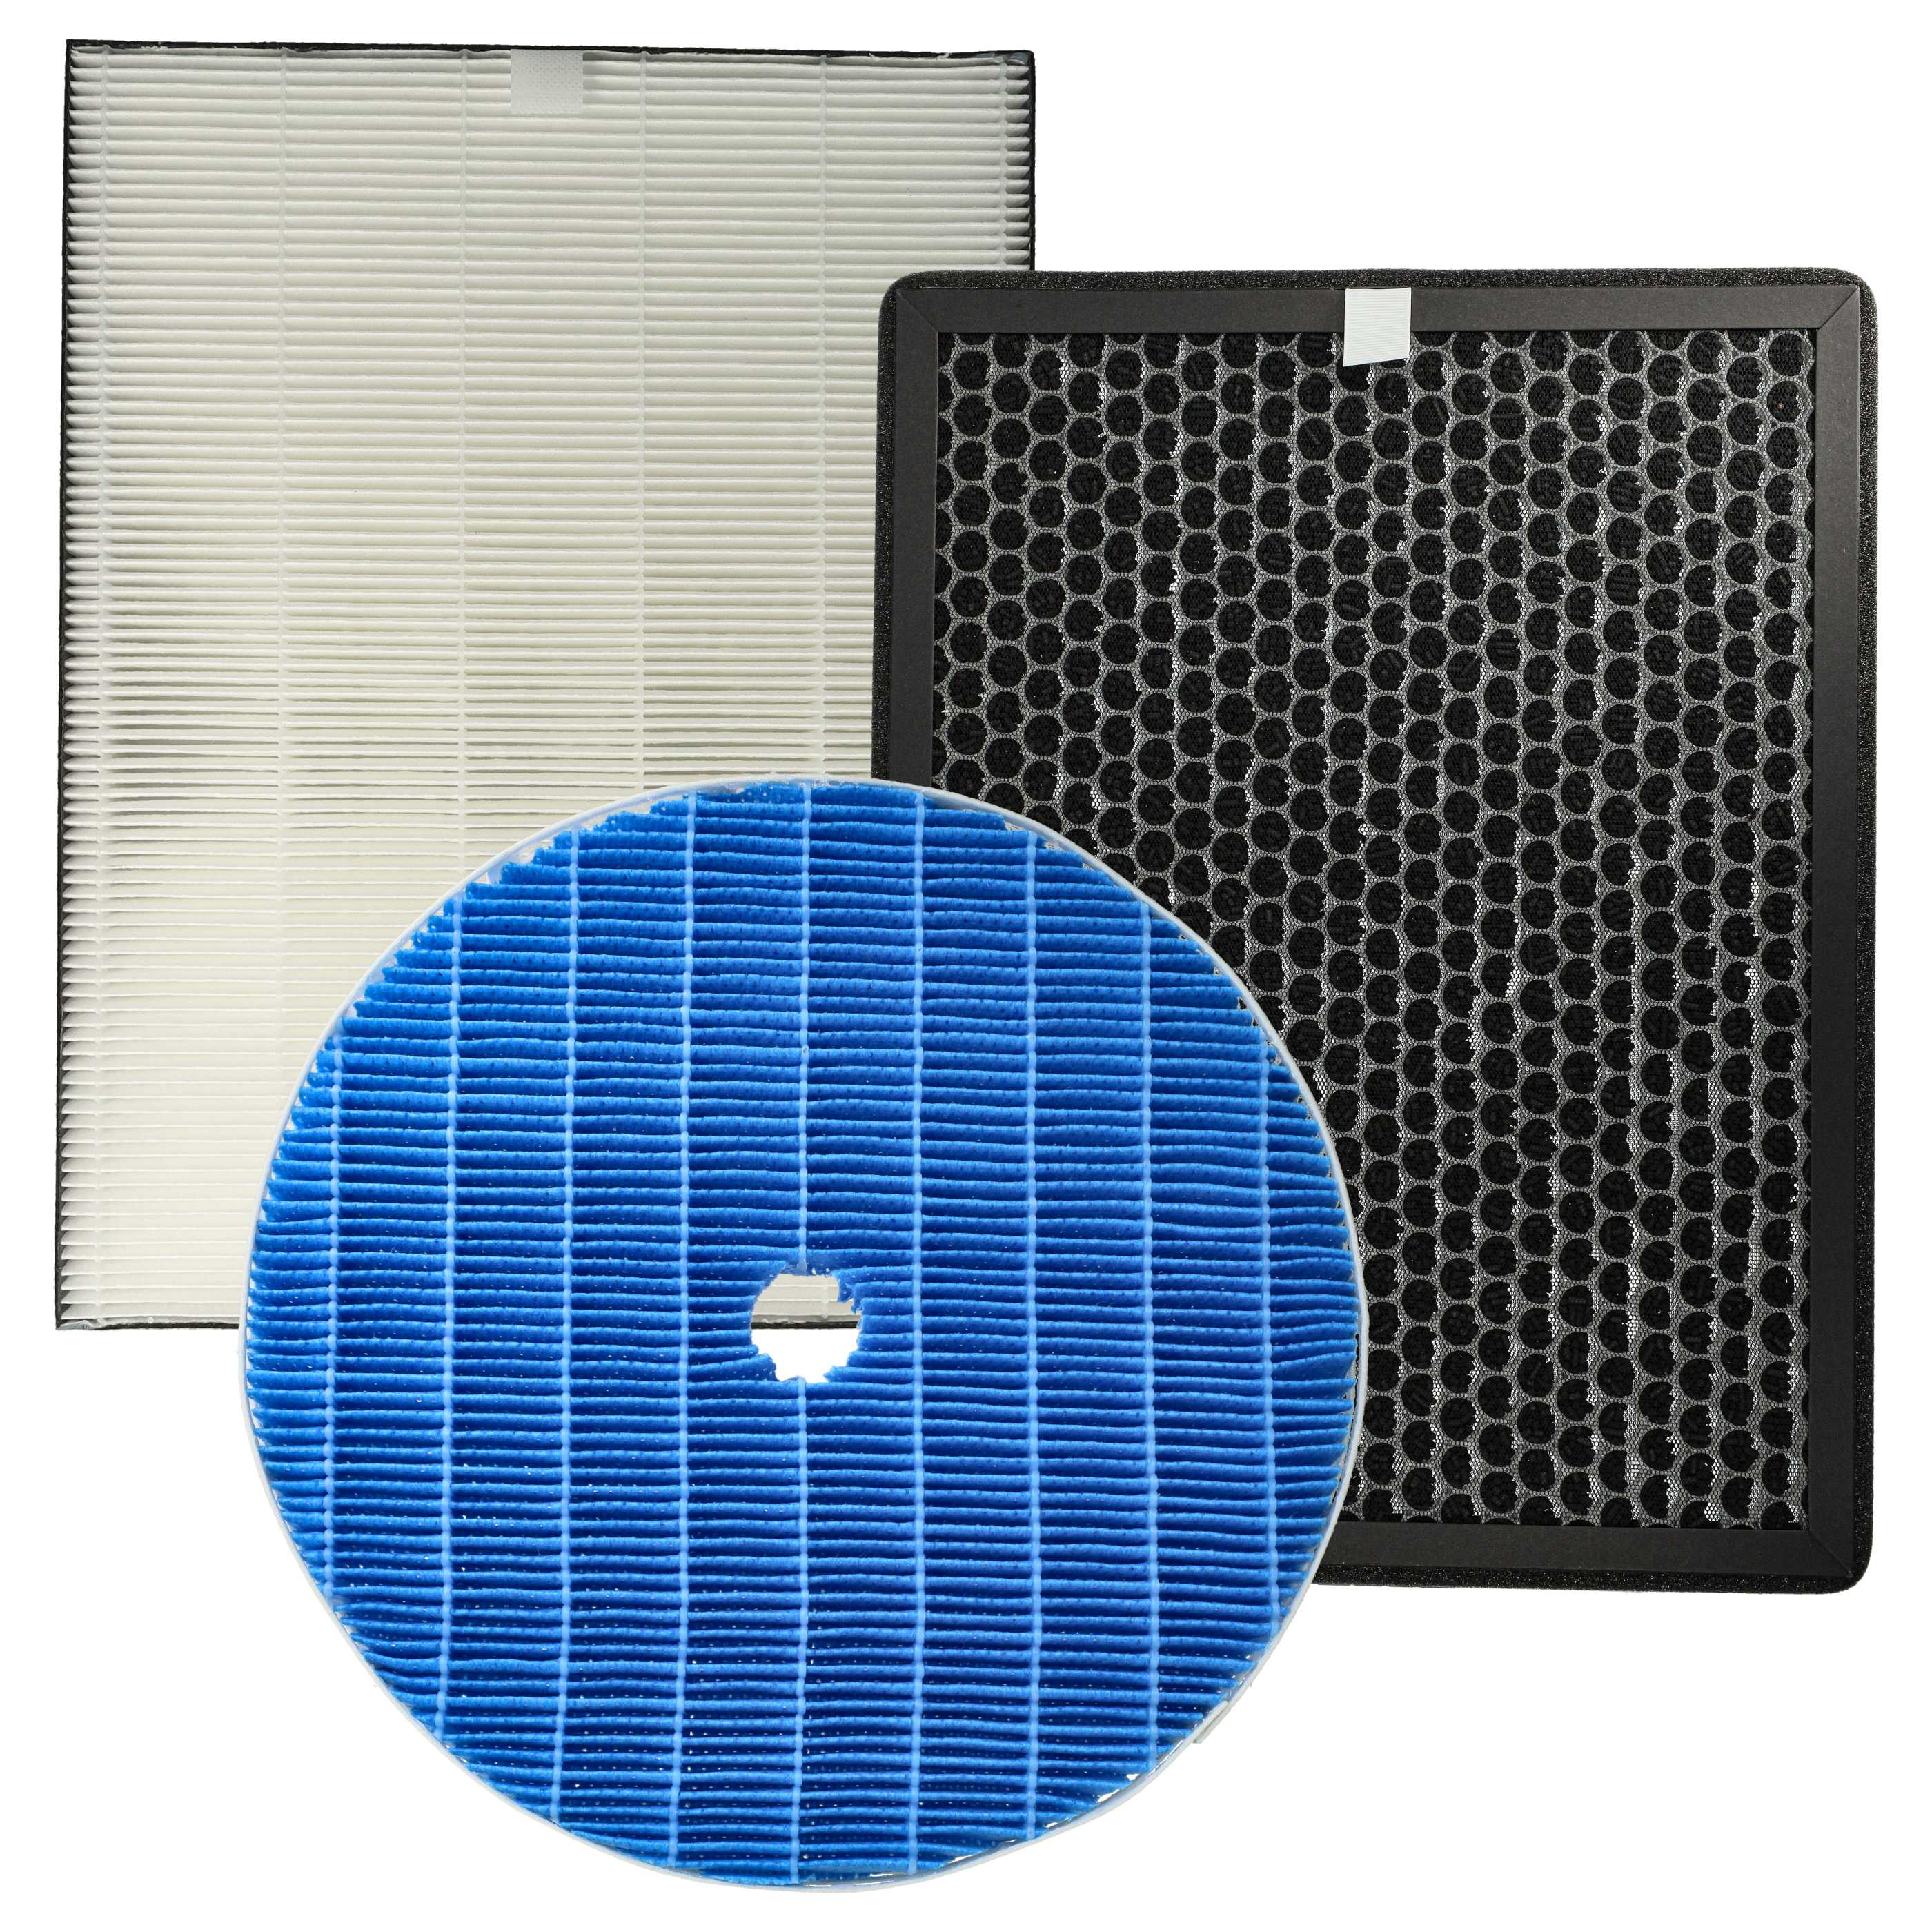 3 Part Filter Set replaces Philips FY3435/30, FY1410/30, FY2422/30 for Air Purifier